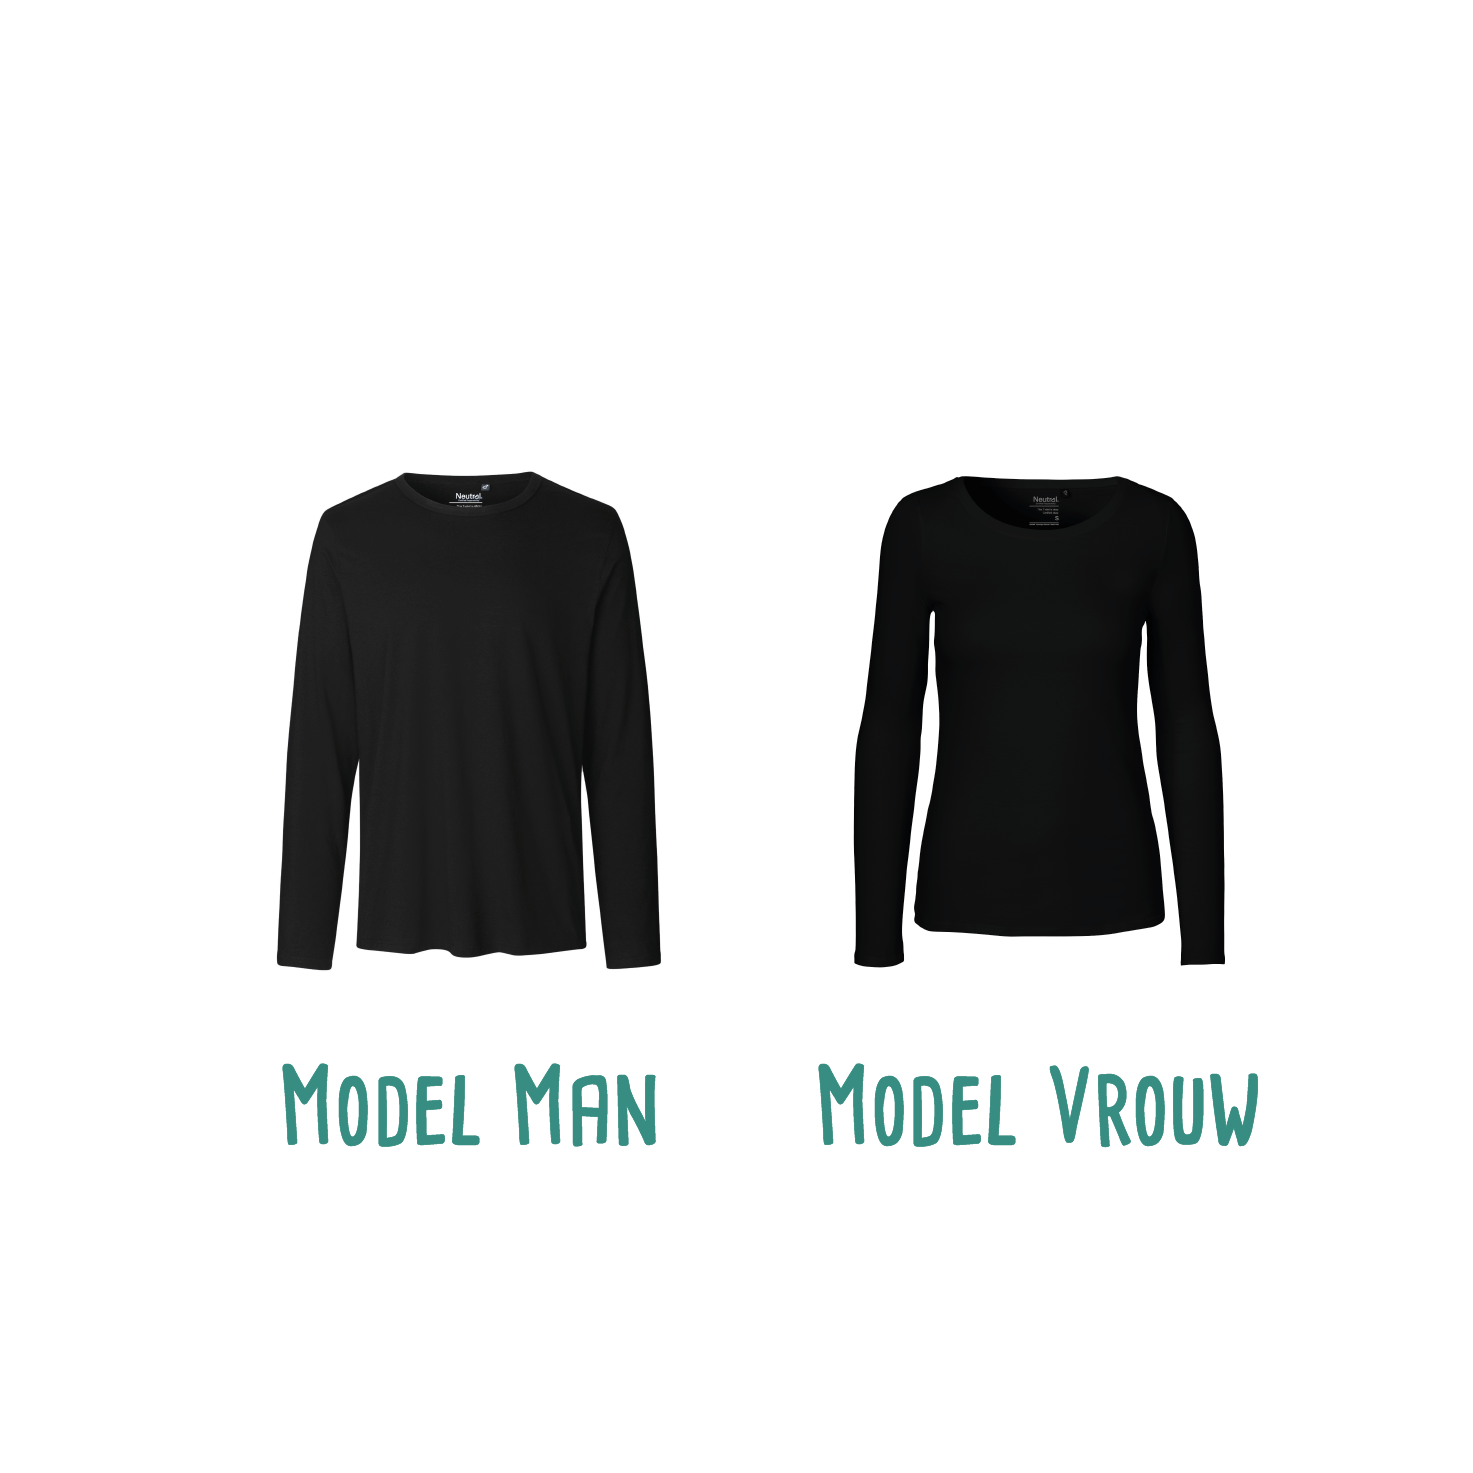 Difference between male or female fit of adult shirts with long sleeves by KMLeon.